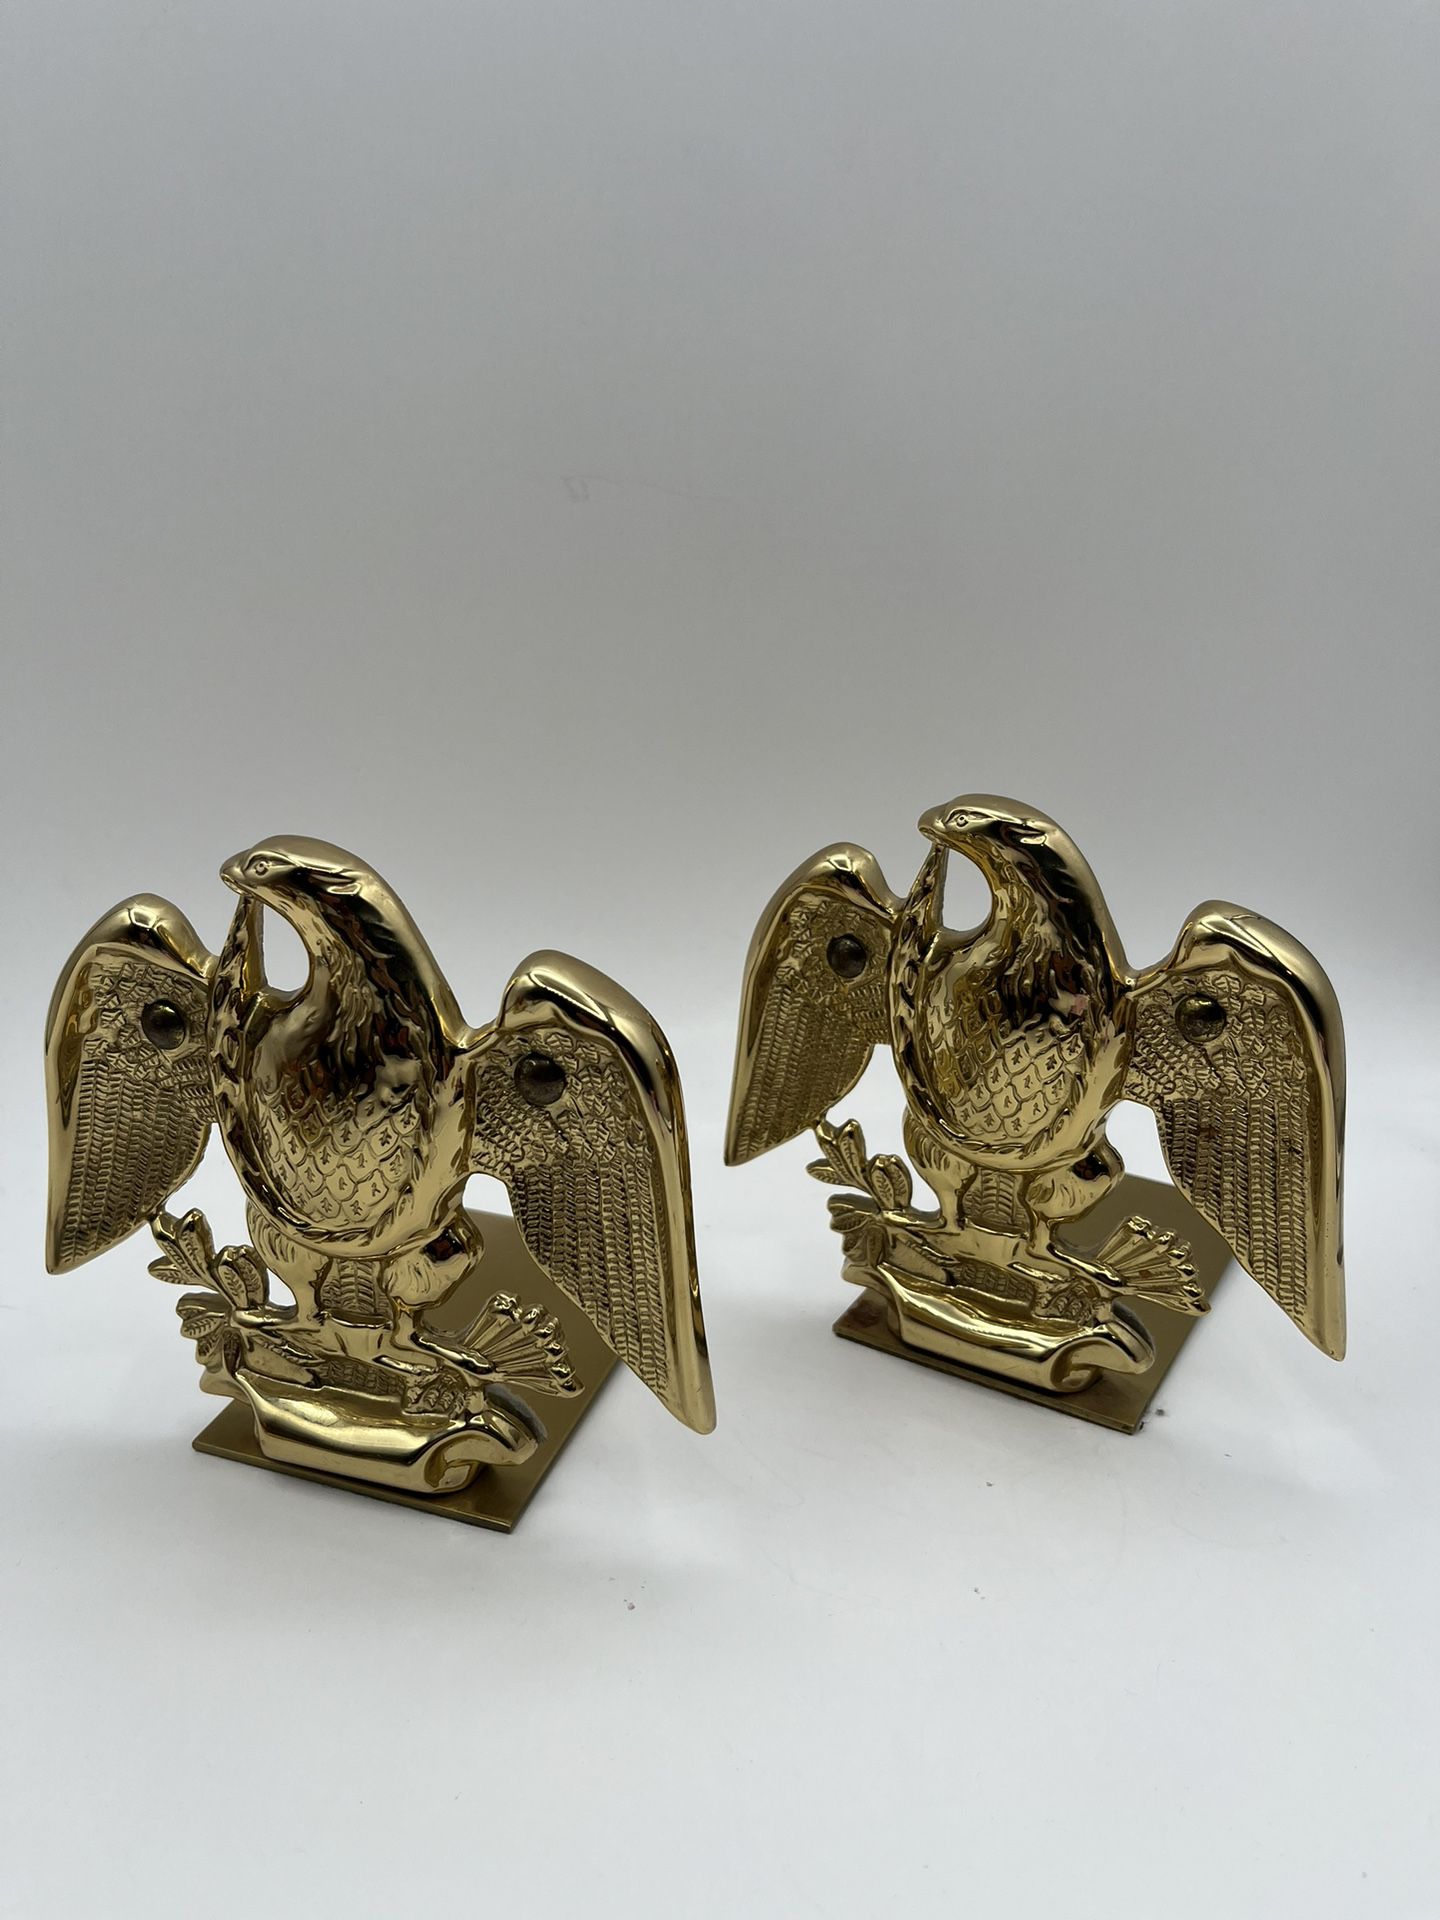 Vintage Baldwin Forget In America Brass Eagle Bookends. Set Of 2 Pieces 